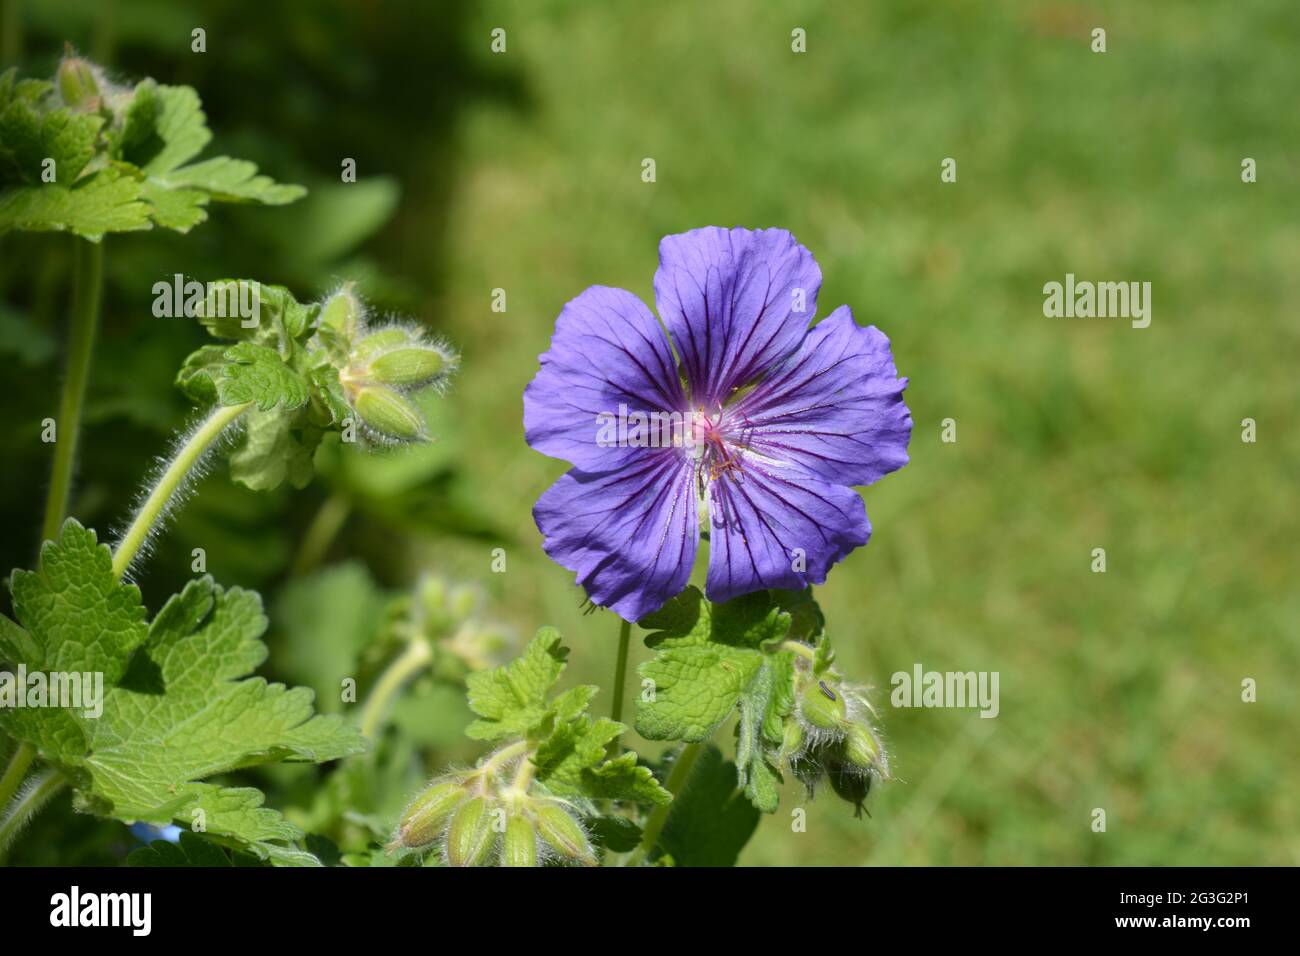 Hardy geranium also known as Cranesbill, plant detail showing purple flower, buds and leaves Stock Photo